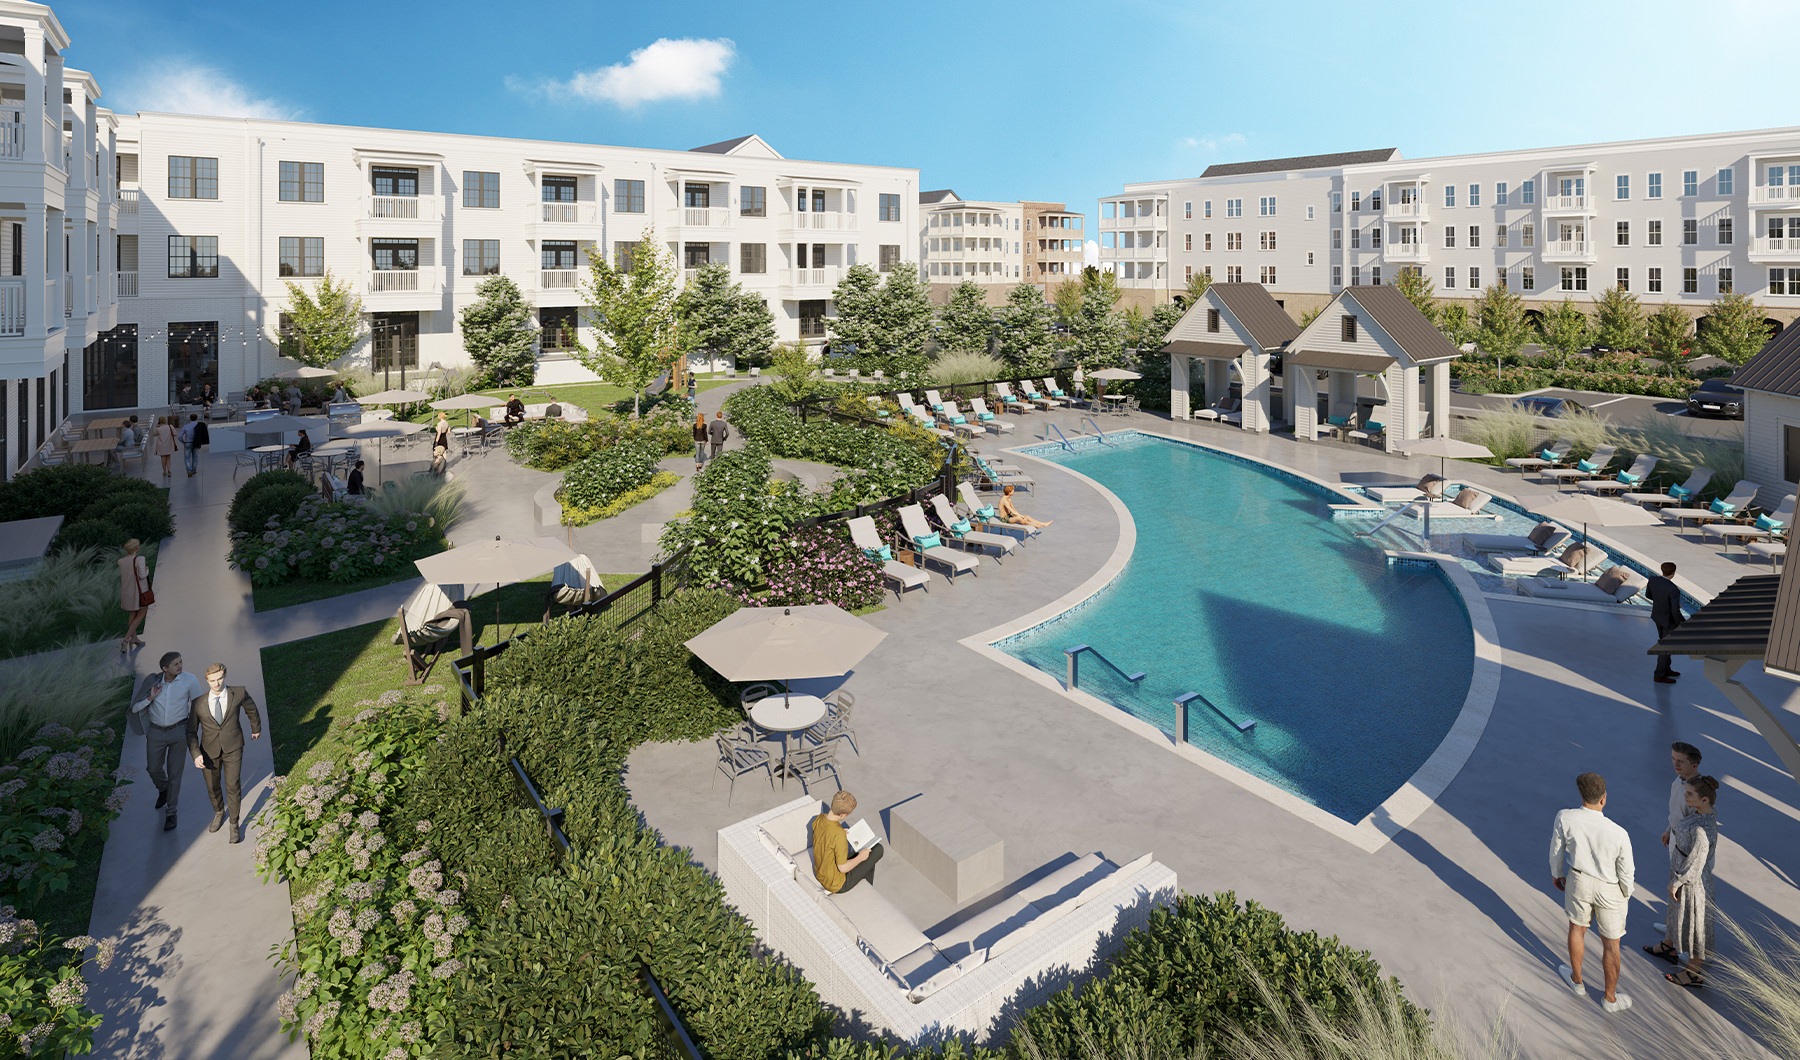 Rendering of the pool at Town Center at Berry Farms